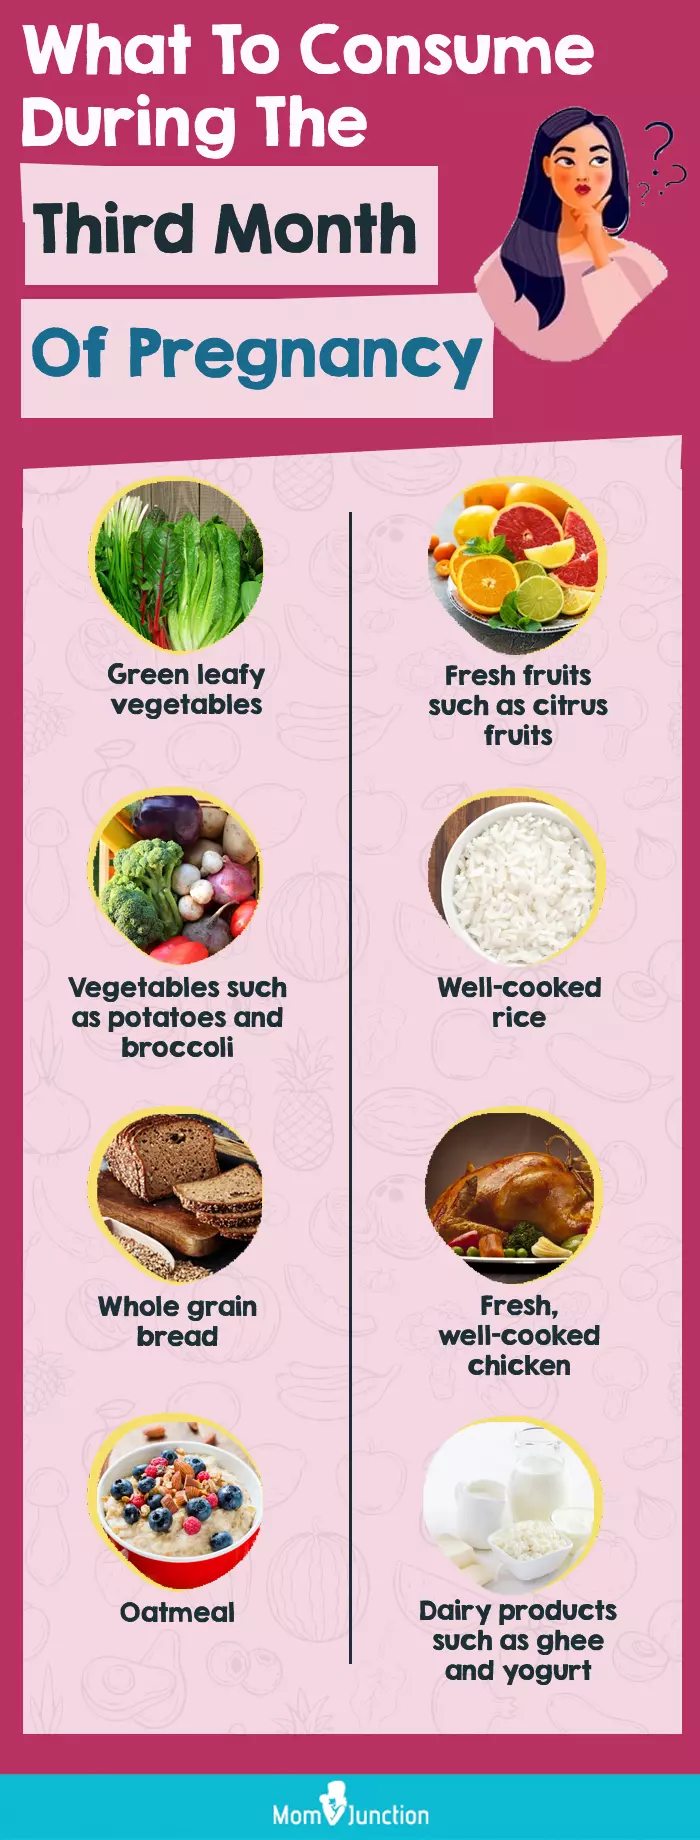 what to consume during the third month of pregnancy (infographic)